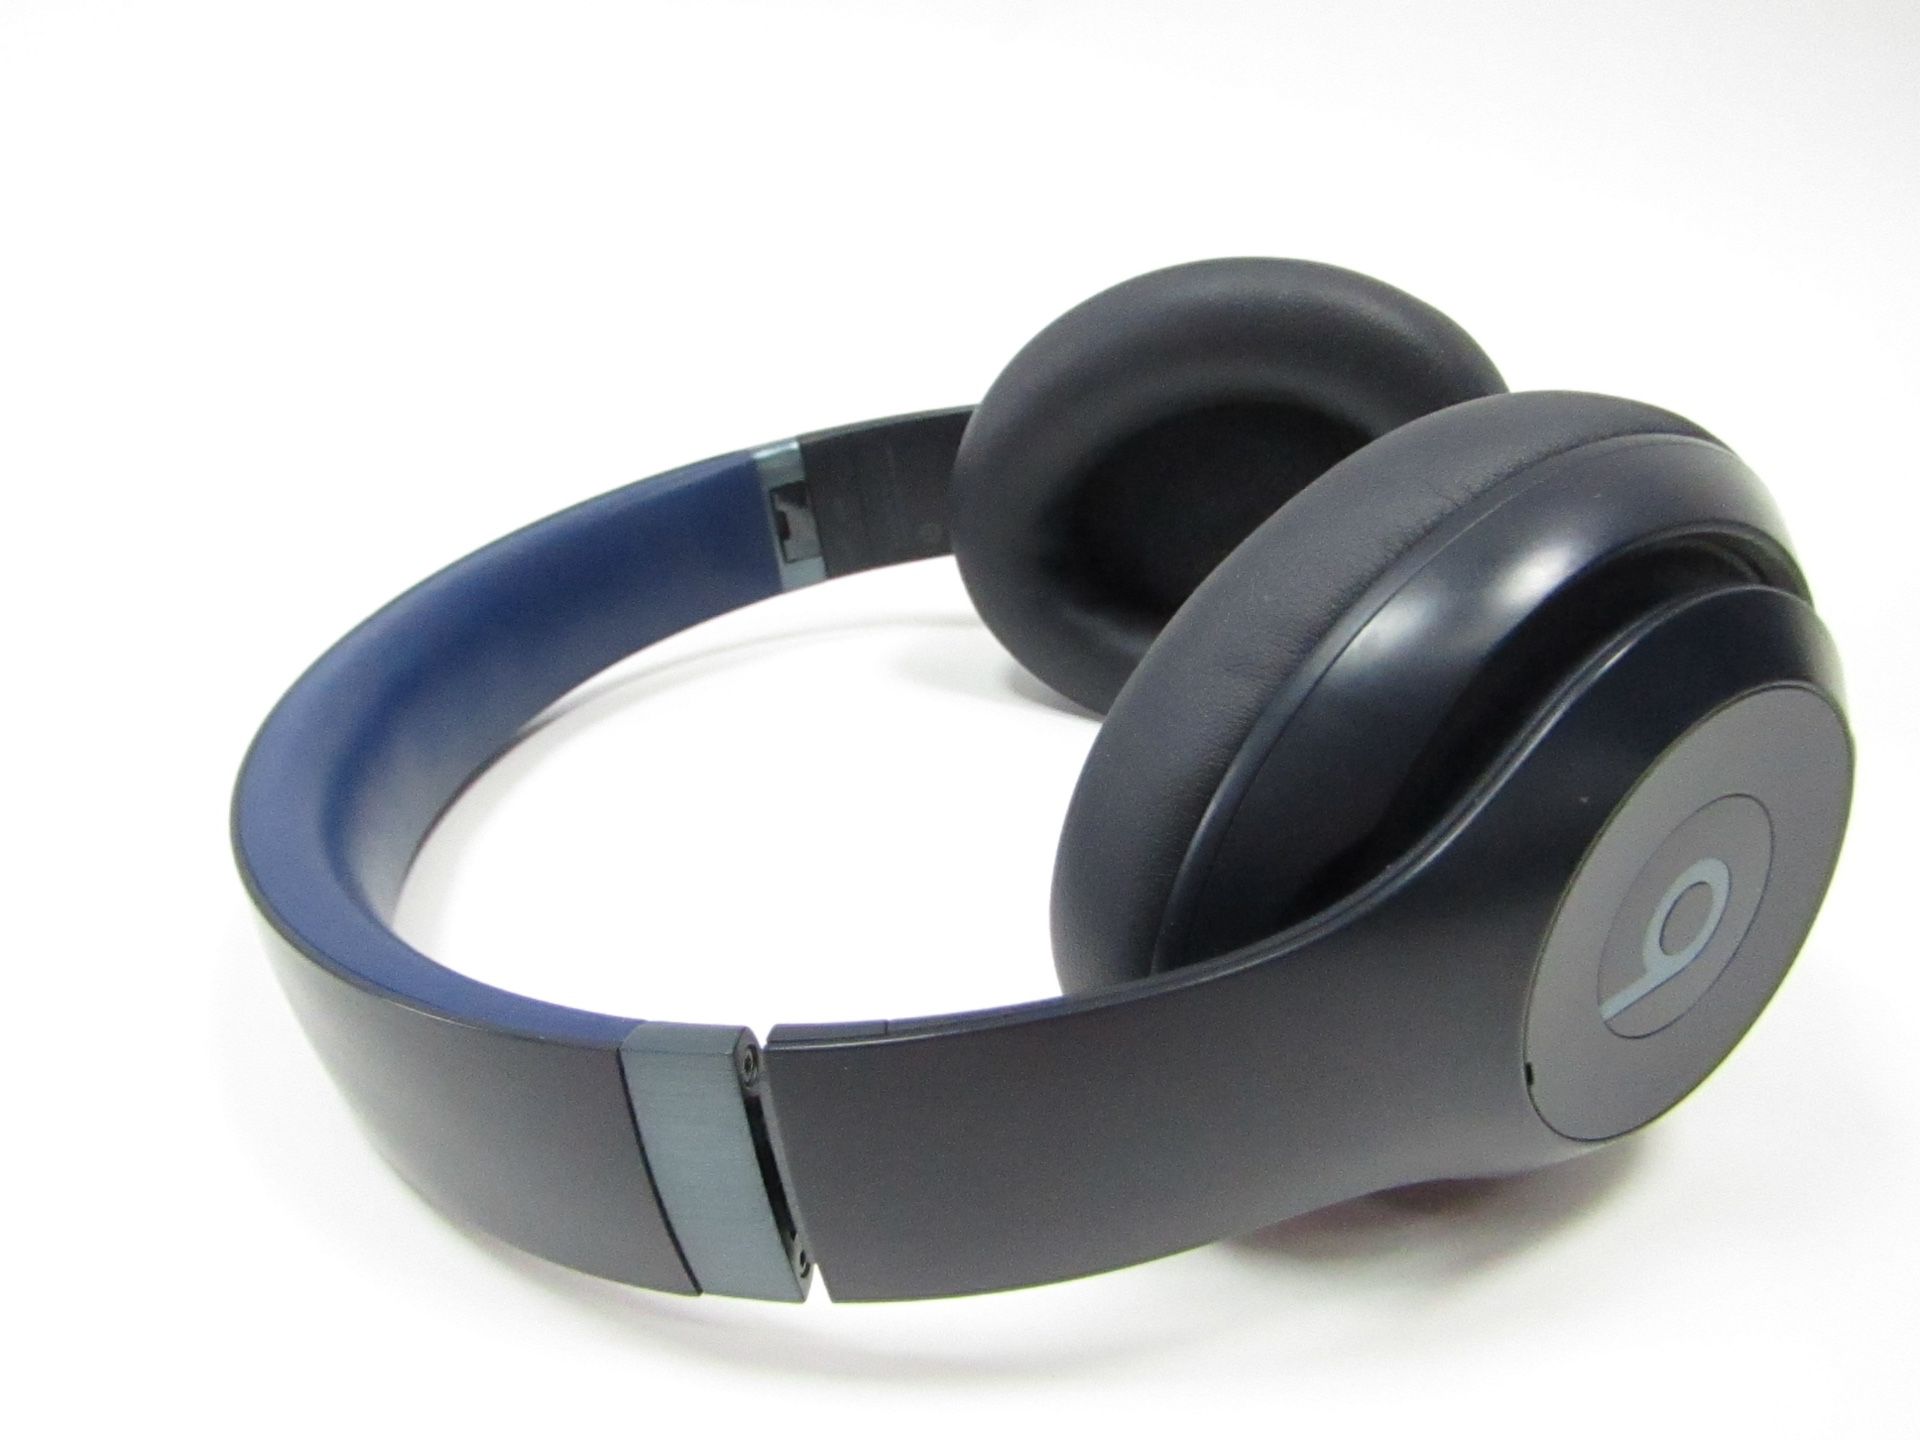 Beats Studio 3 Navy With New Black Ear Pads